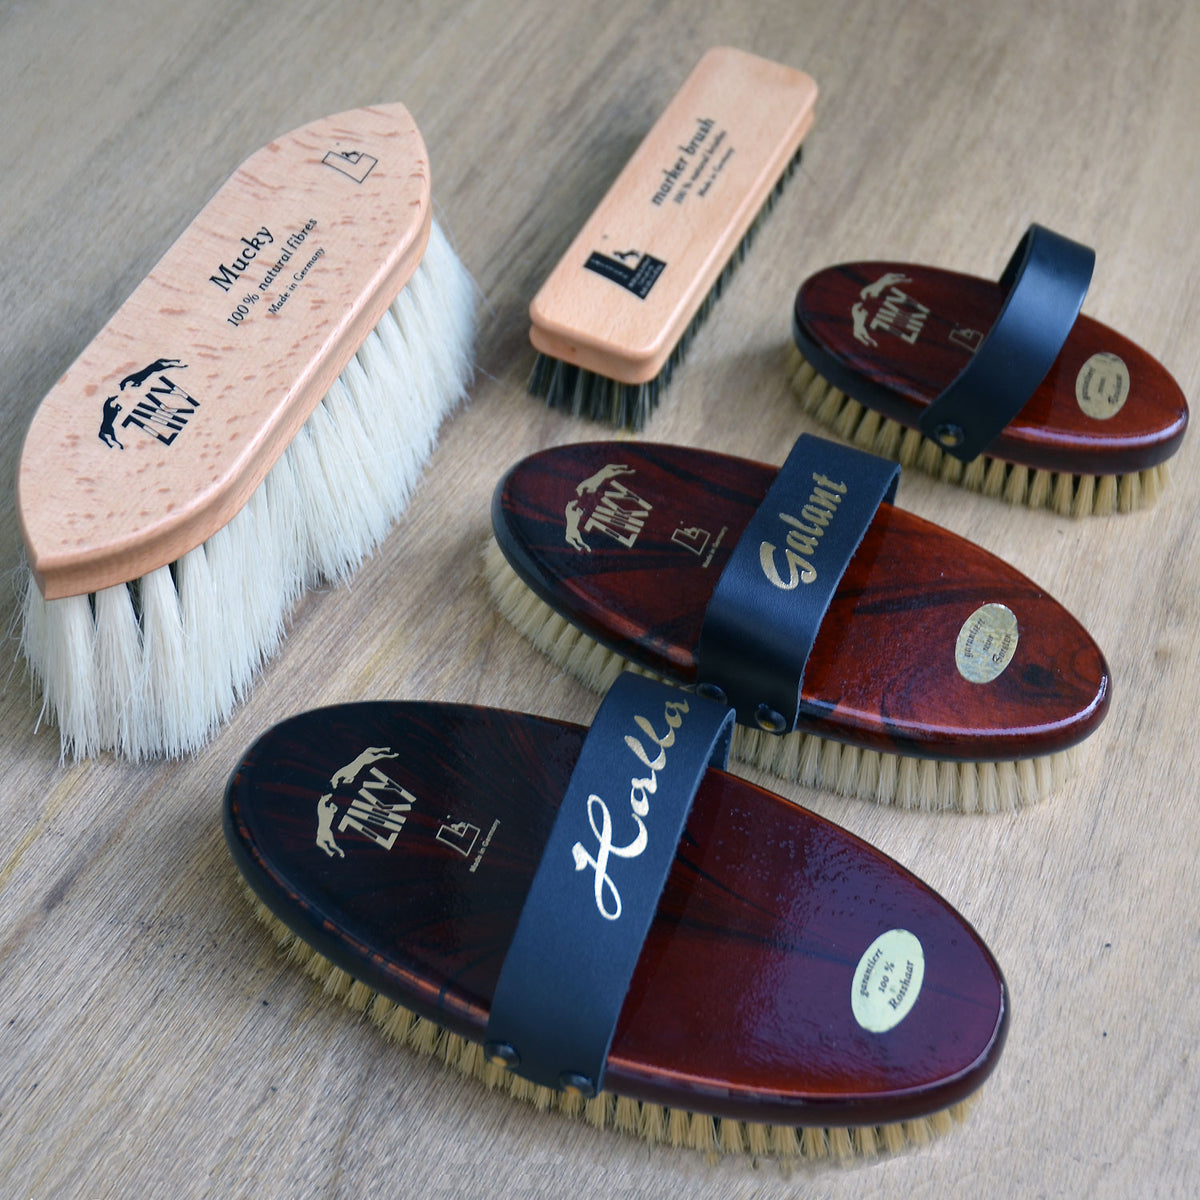 ZIKY horse grooming brushes by Leistner